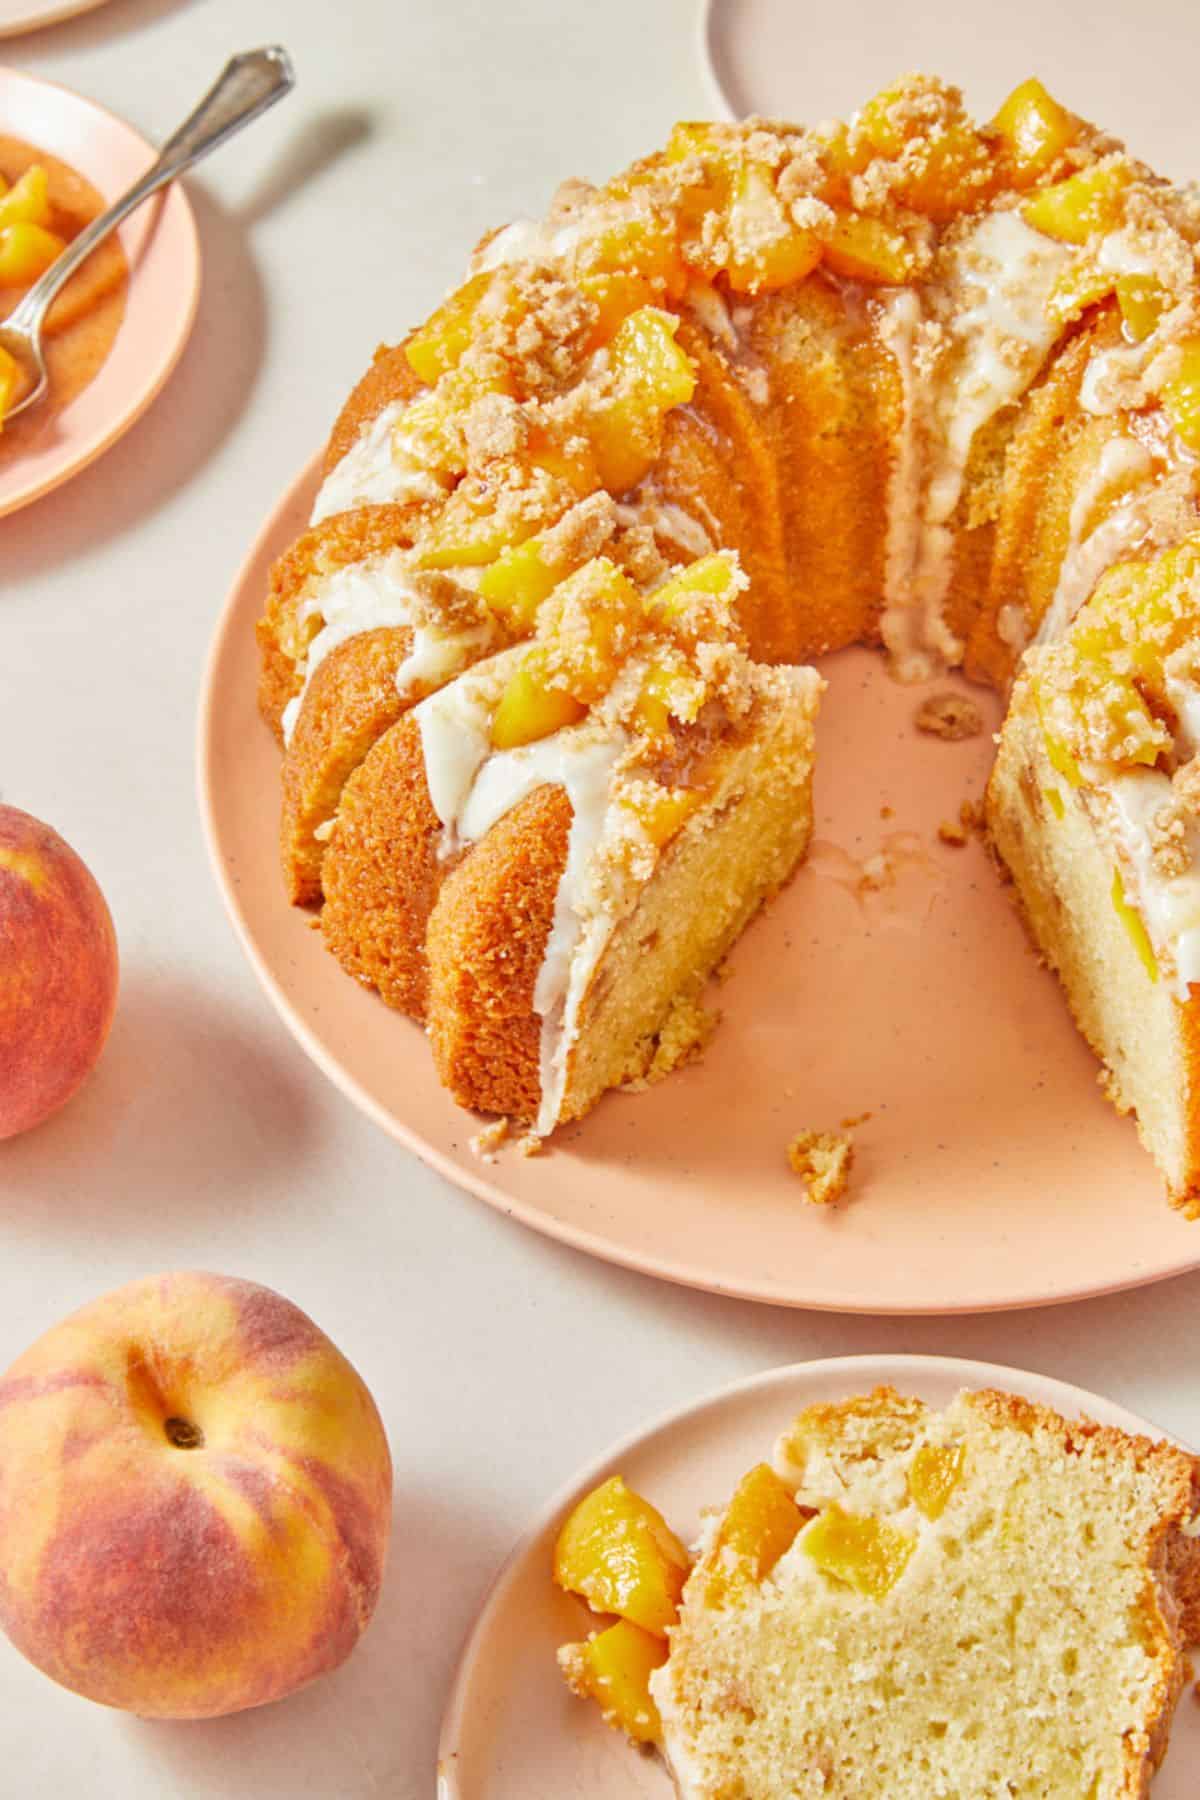 A sliced peach cobbler pound cake with one piece removed, showing the cake’s interior. The cake is garnished with peach chunks and crumble topping, drizzled with glaze, and accompanied by whole peaches, all set on a pink plate